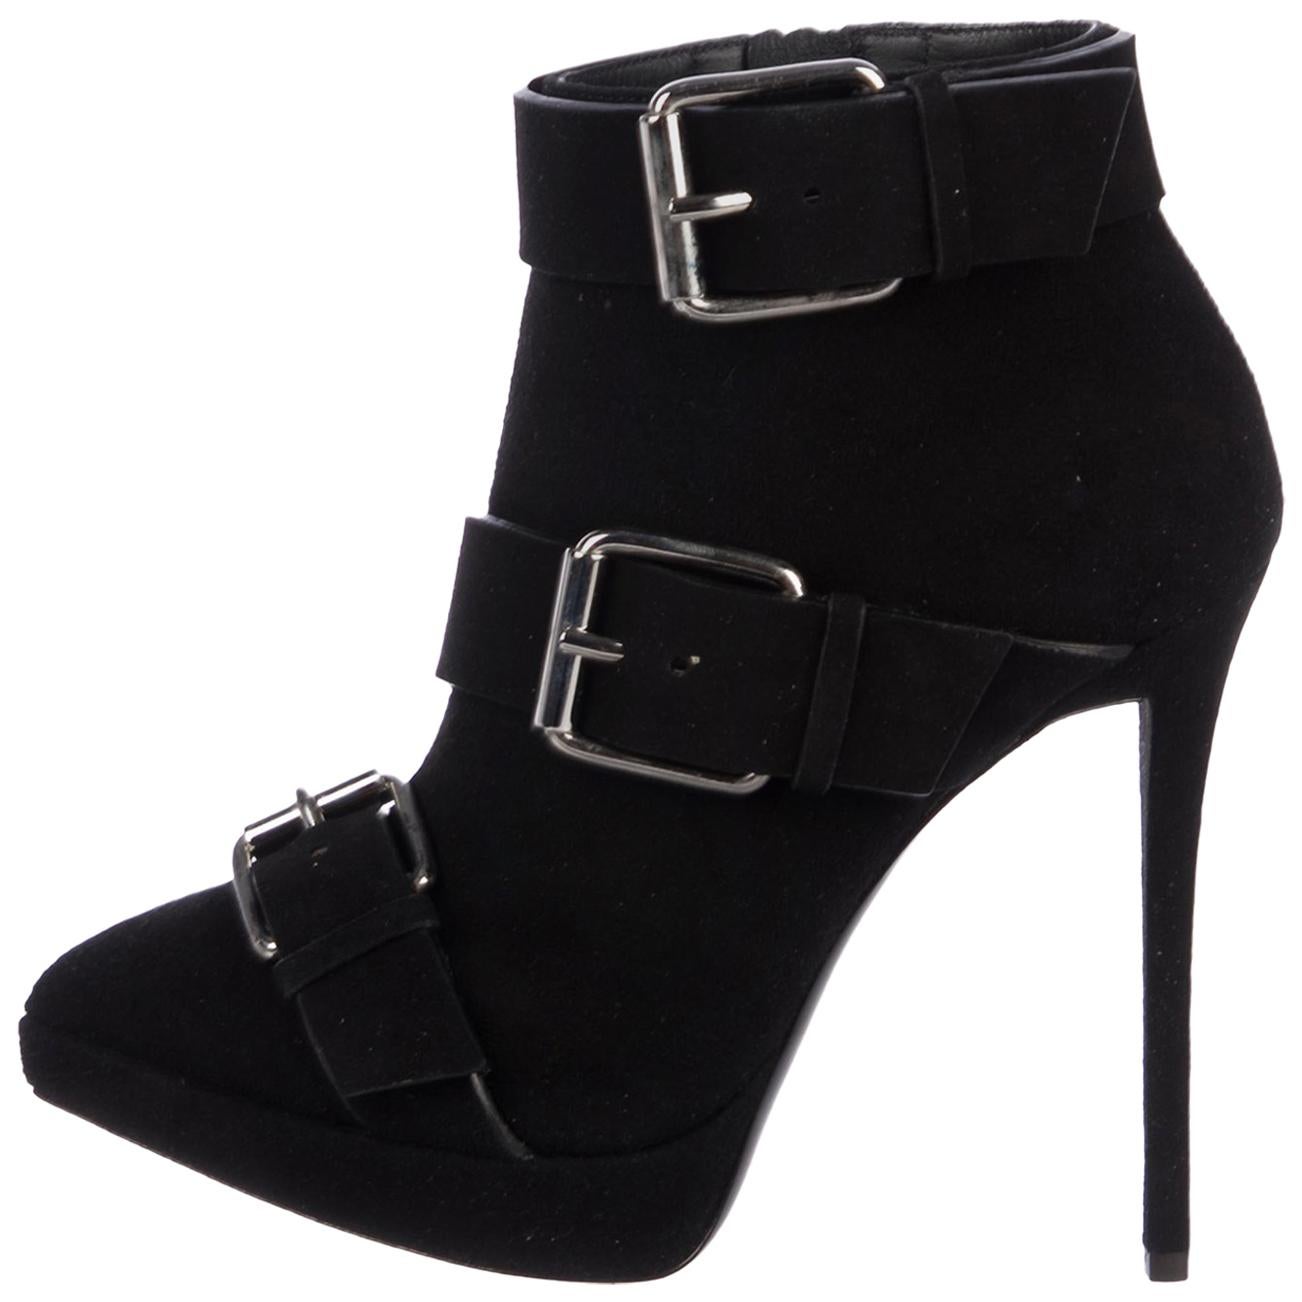 Giuseppe Zanotti NEW Black Suede Silver Biker Buckle Ankle Boots Booties in Box